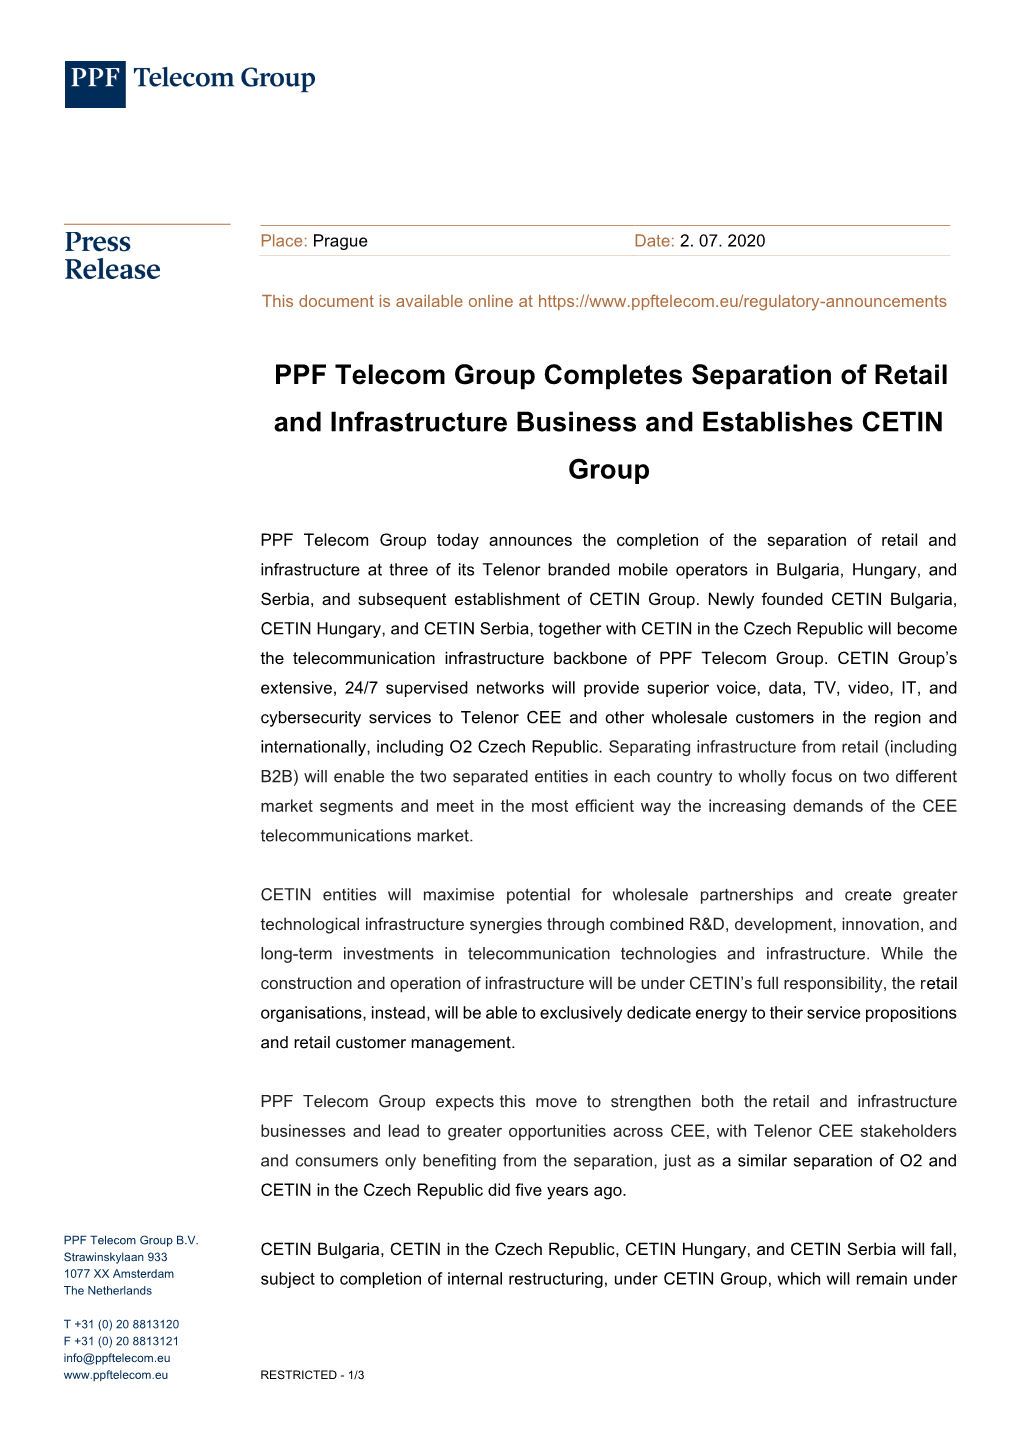 PPF Telecom Group Completes Separation of Retail and Infrastructure Business and Establishes CETIN Group